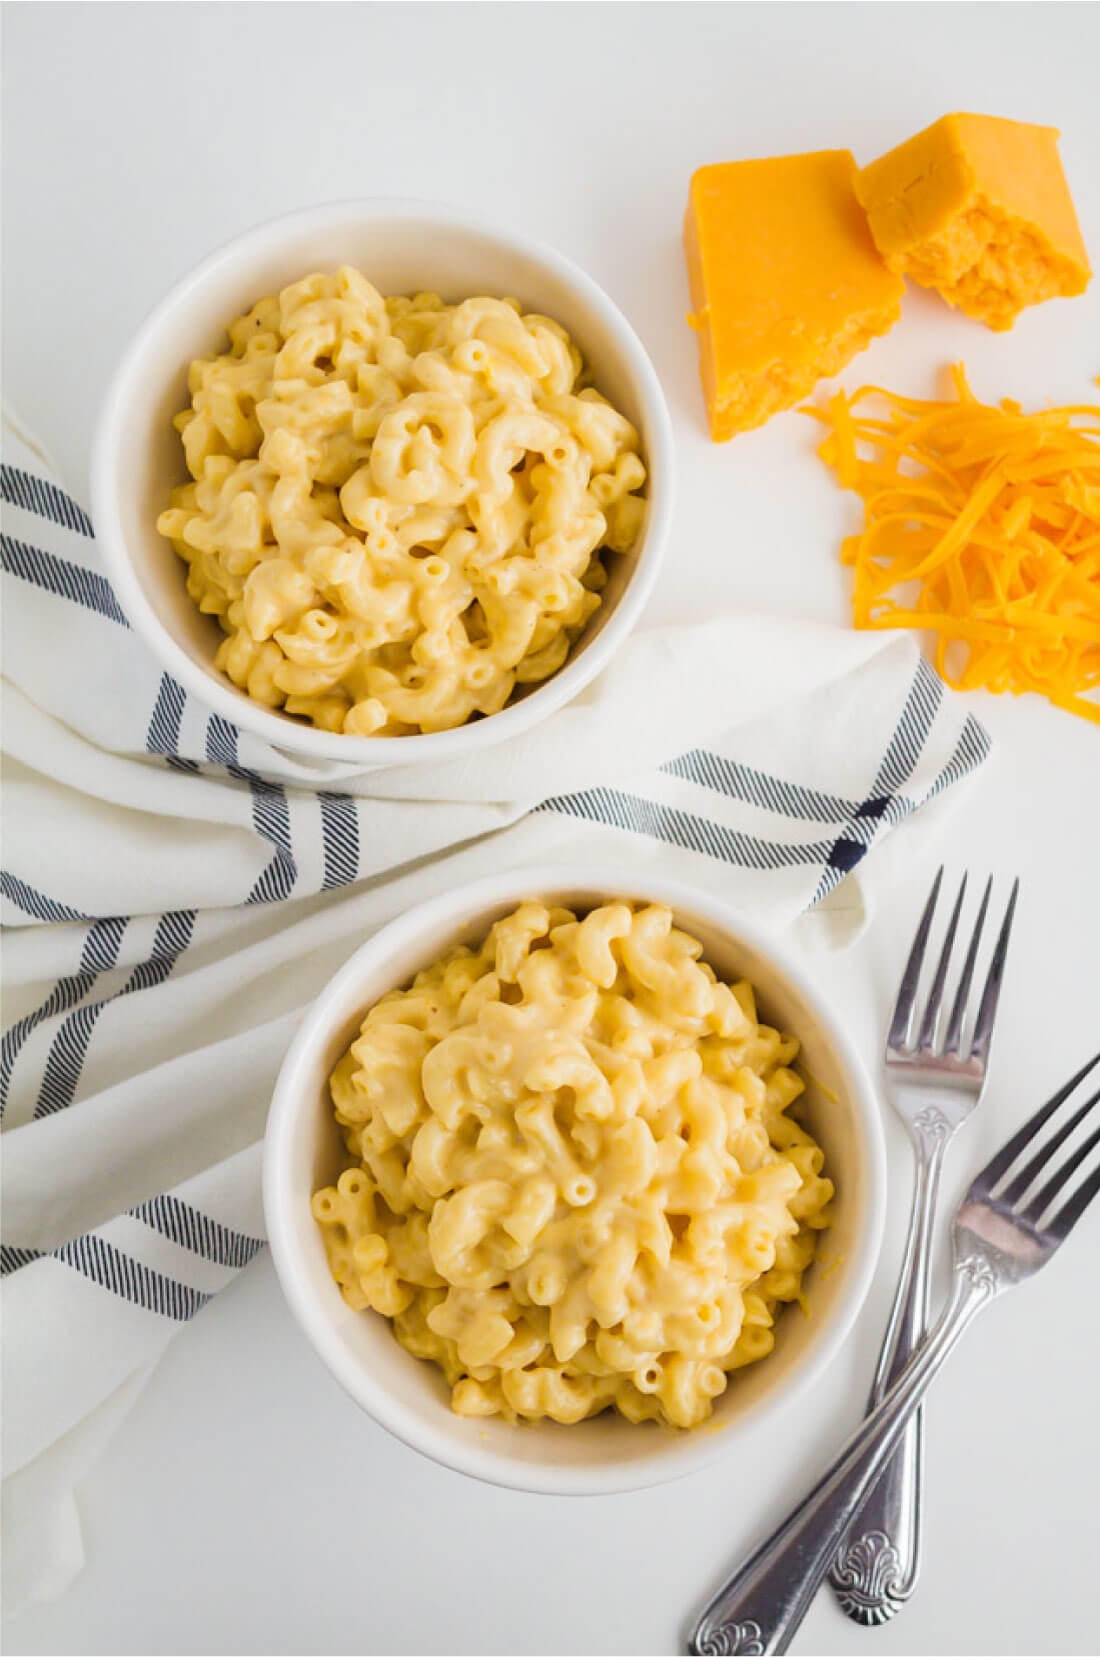 Slow Cooker Macaroni and Cheese Recipe - make this amazing mac and cheese recipe in the crockpot! from www.thirtyhandmadedays.com